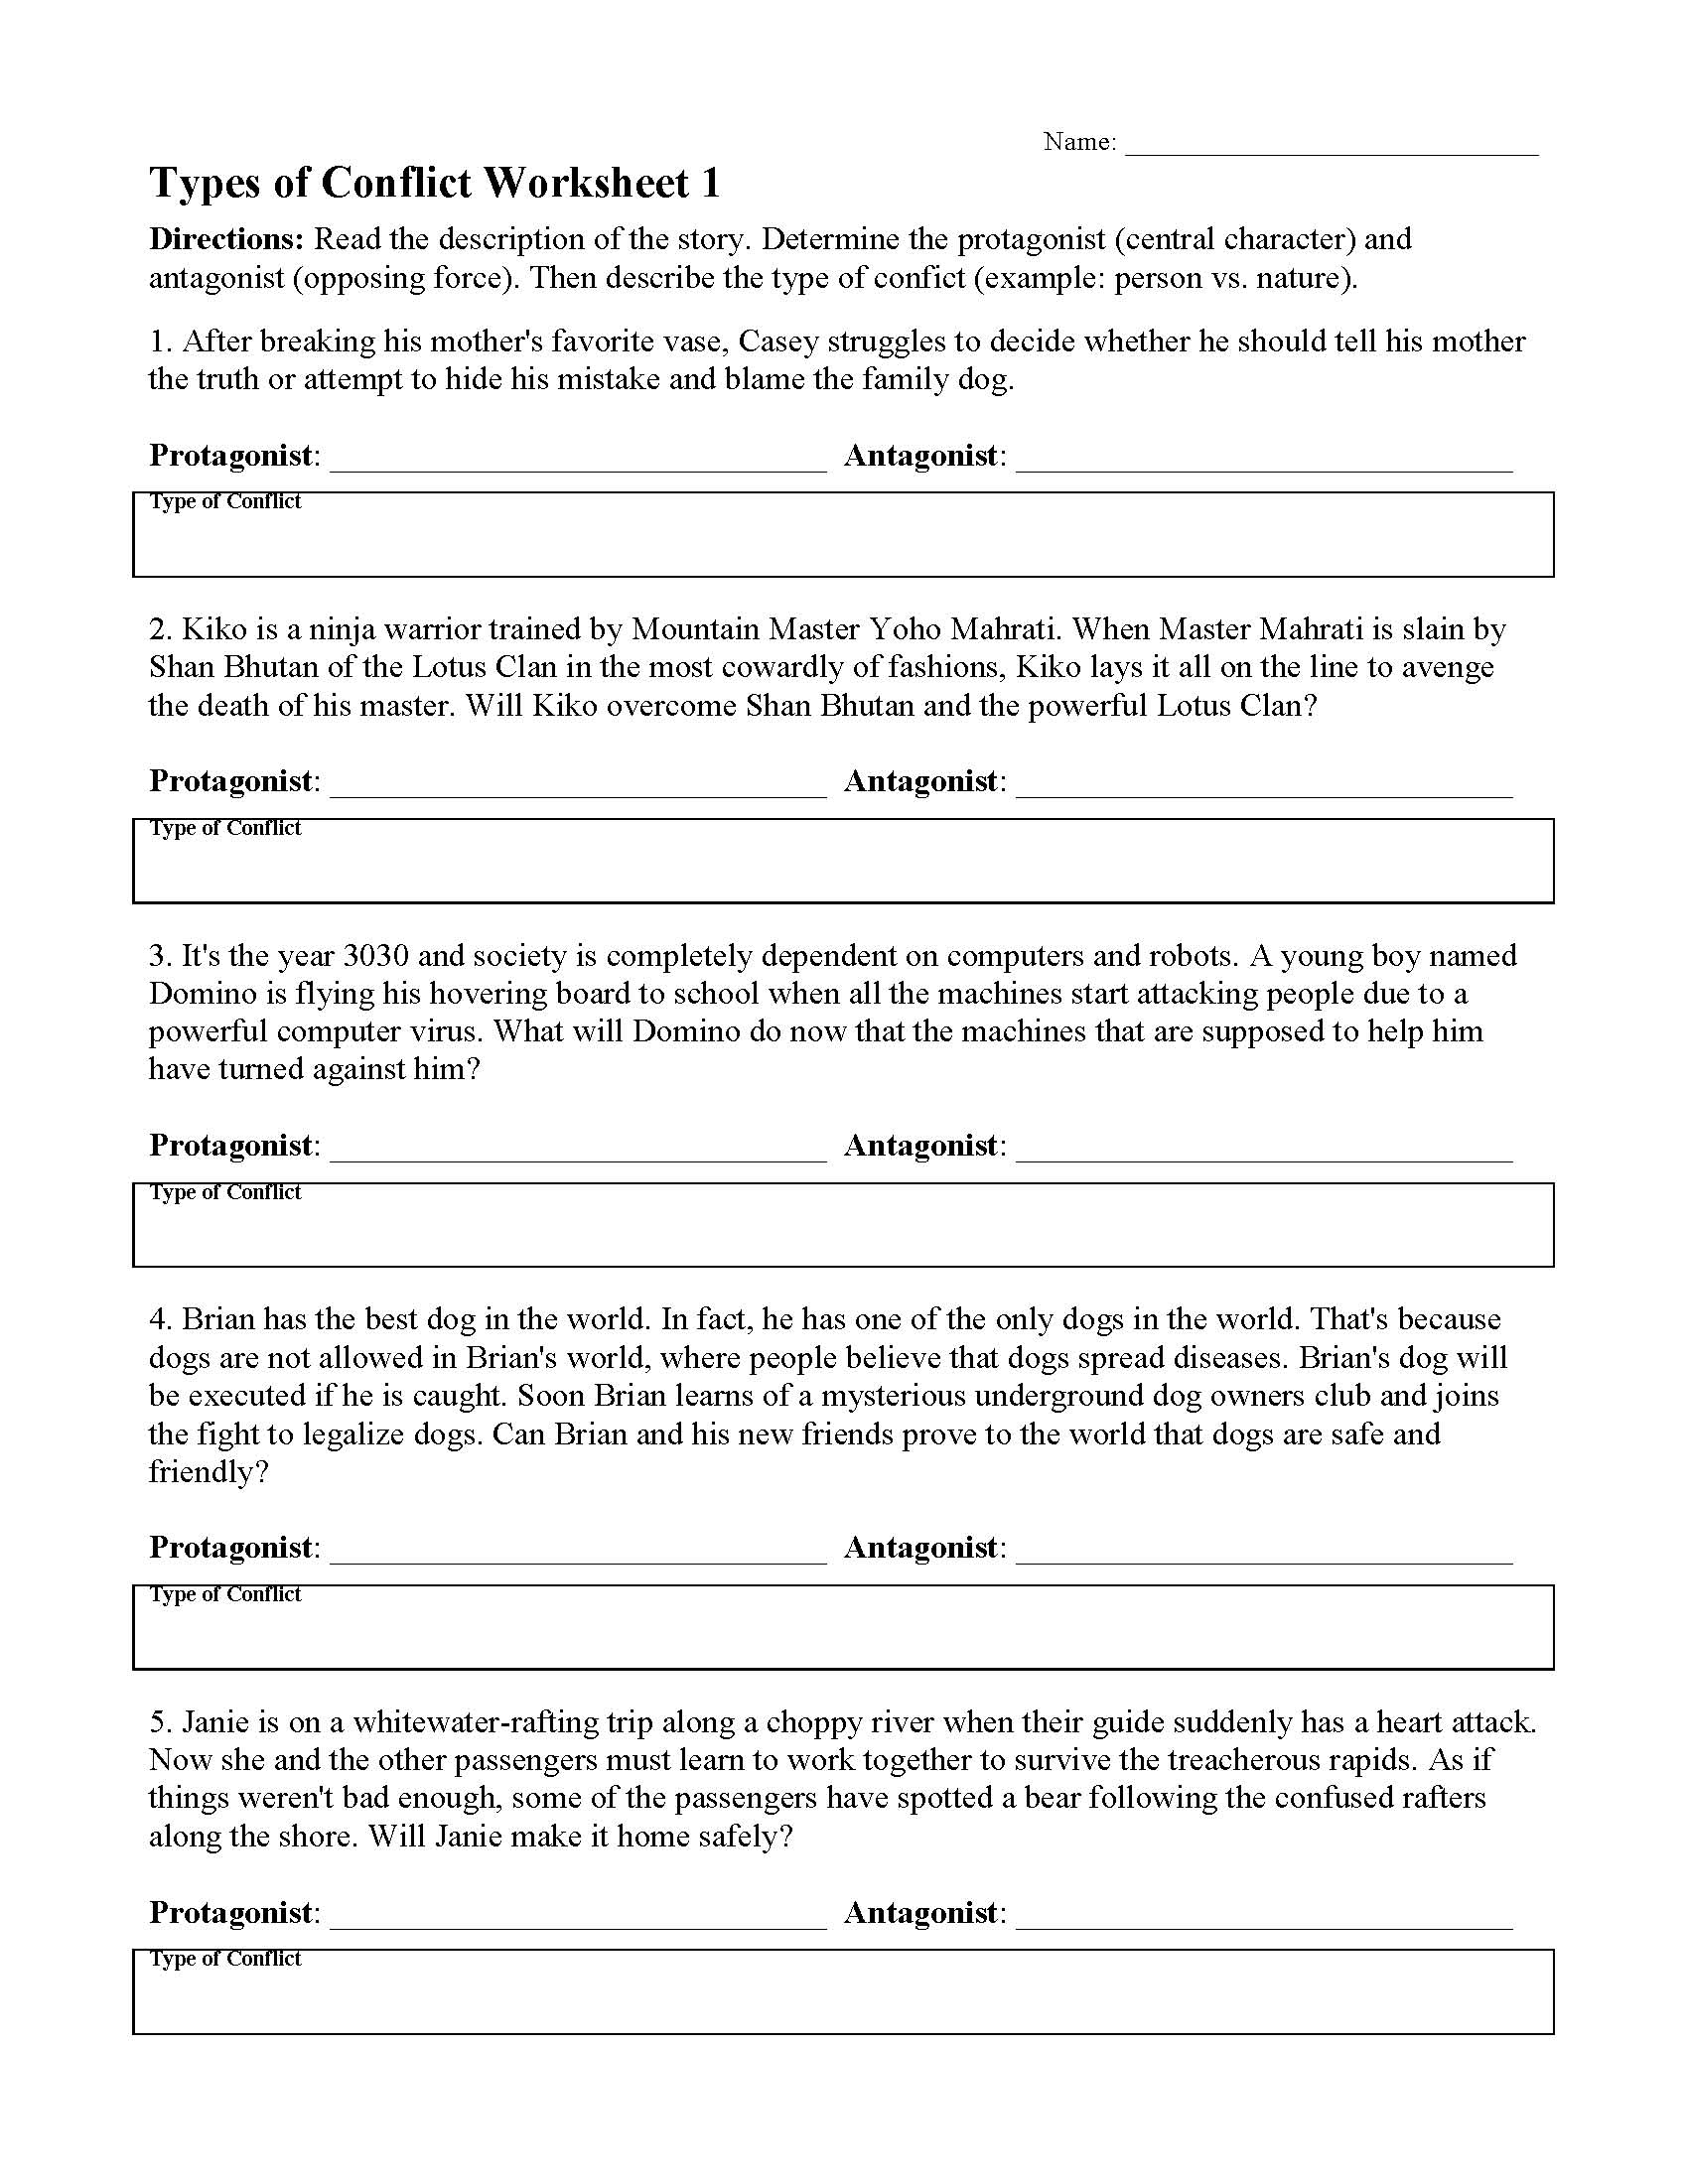 Types of Conflict Worksheet 1 | Preview